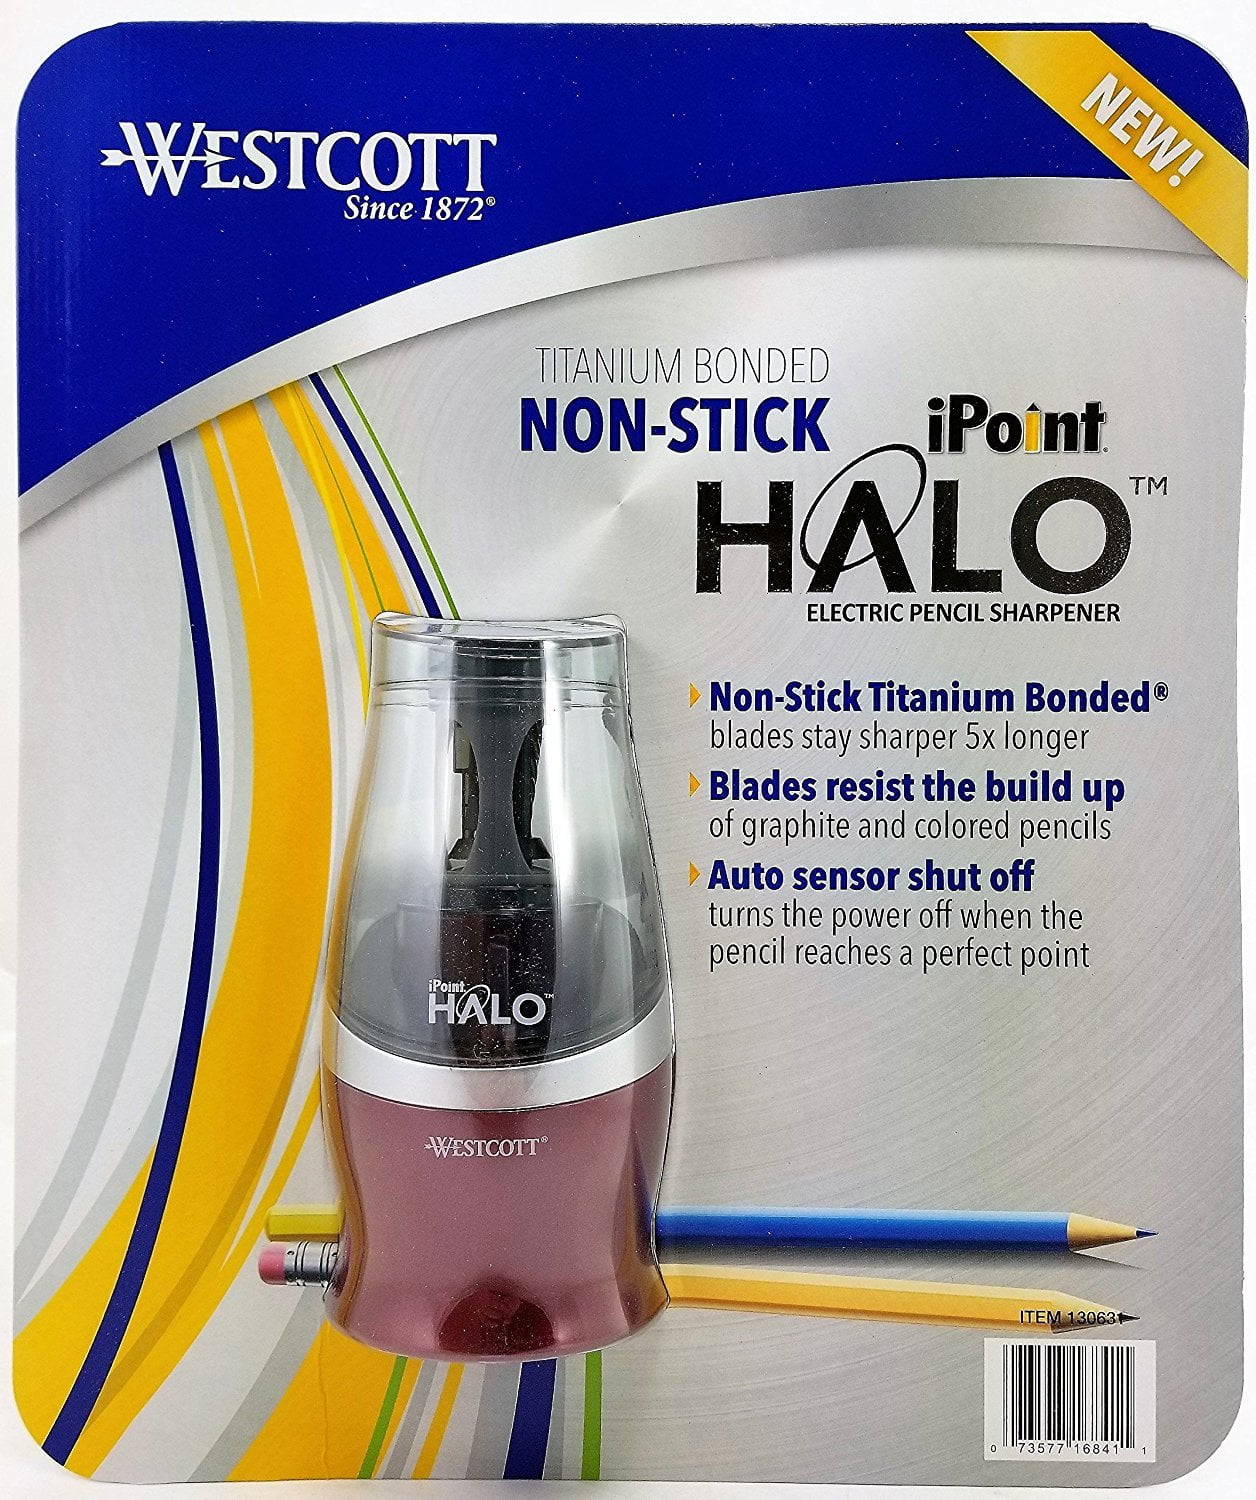 Unboxed Westcott iPoint Halo Electric Pencil Sharpener 